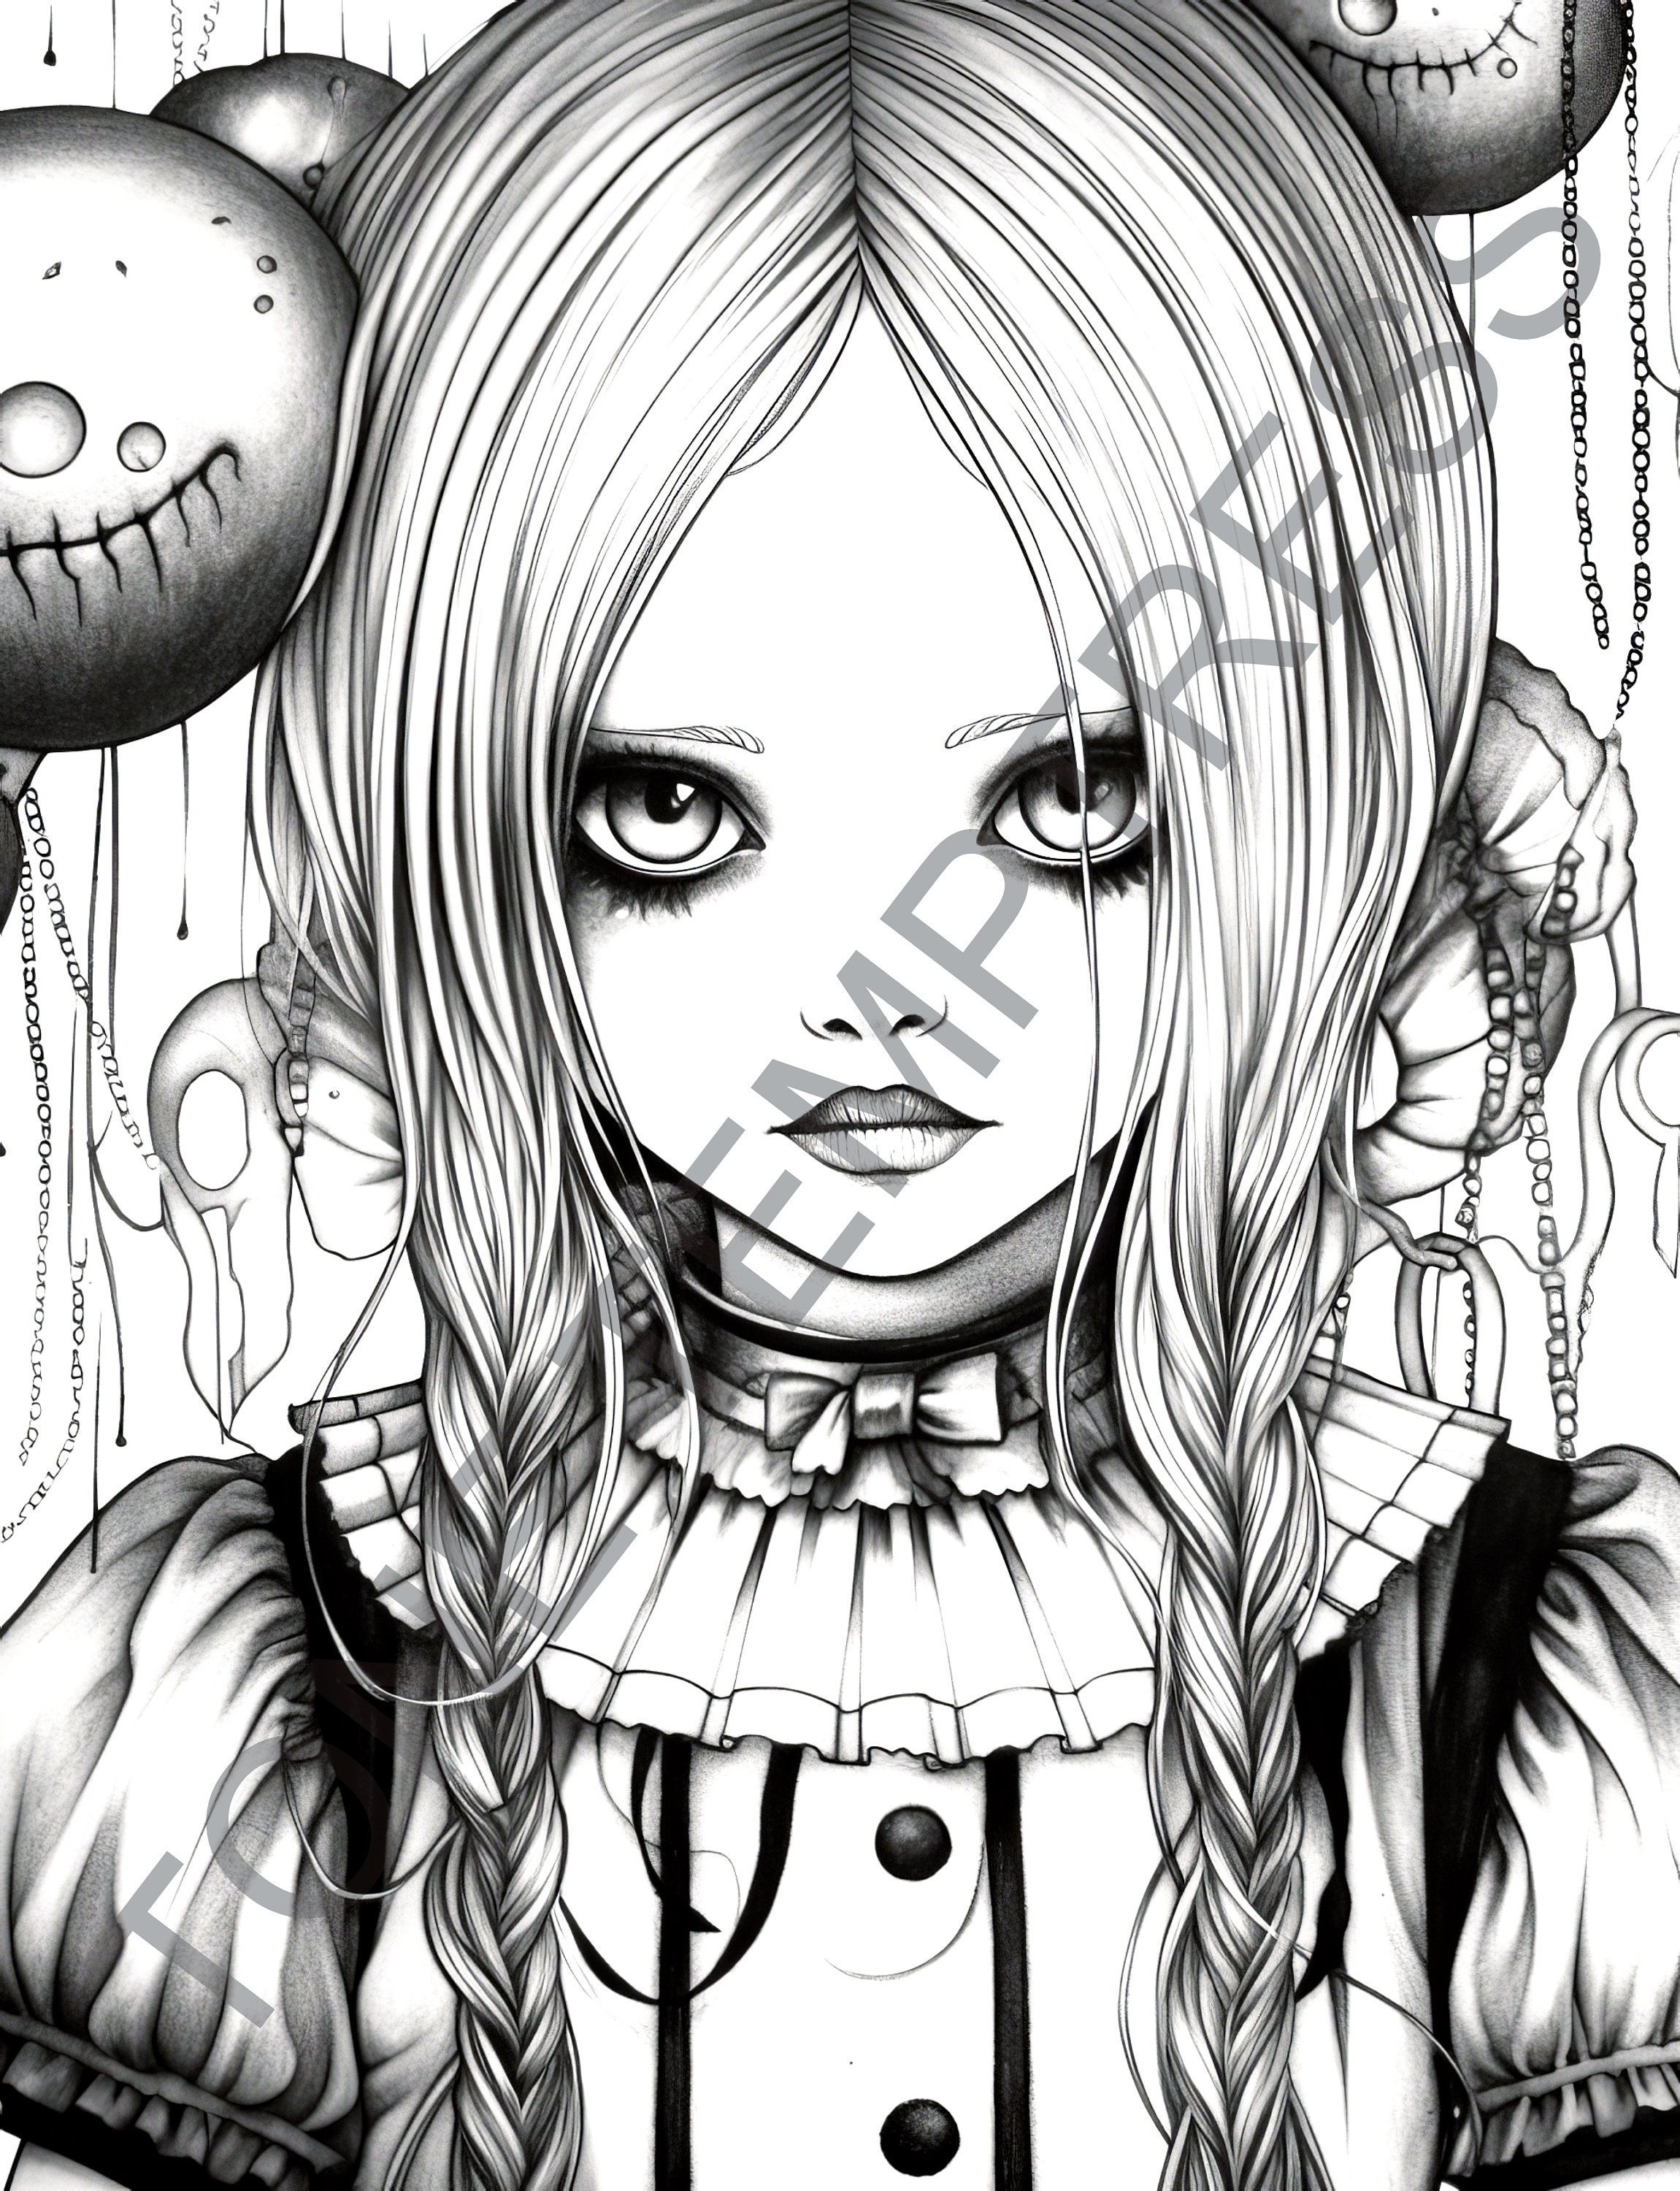 Wicked Girls Coloring Book: Dark Anime Girl Coloring Pages Featuring Cute &  Creepy Illustrations For Adults Teens To Relax And Relieve Stress:  Crenshaw, Markus: 9798394534645: : Books